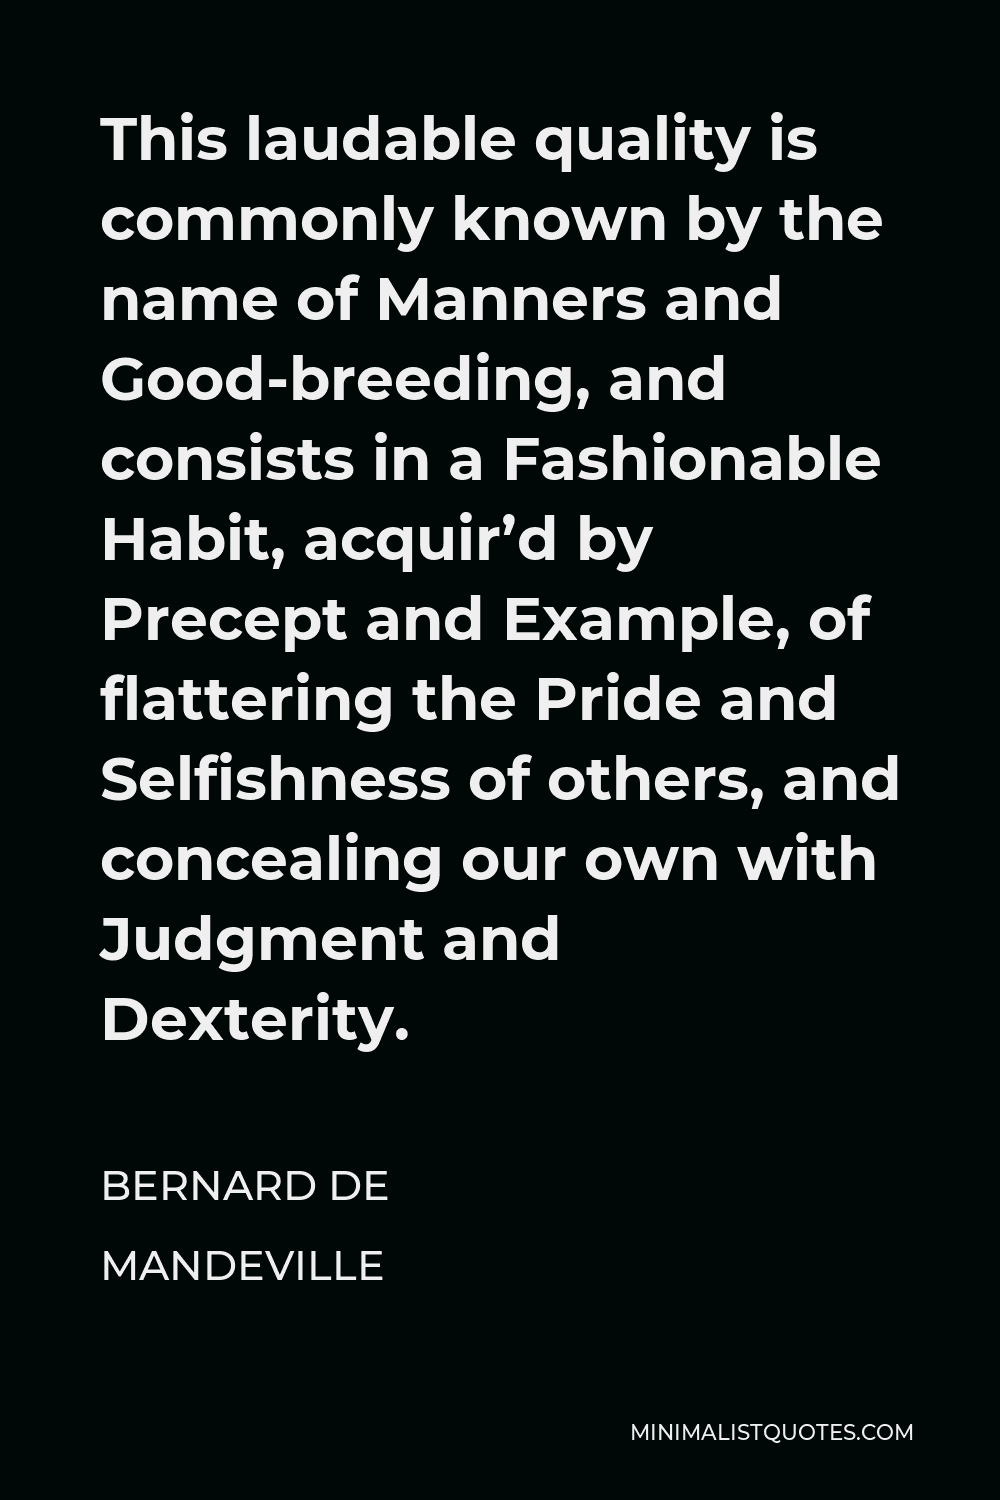 Bernard de Mandeville Quote - This laudable quality is commonly known by the name of Manners and Good-breeding, and consists in a Fashionable Habit, acquir’d by Precept and Example, of flattering the Pride and Selfishness of others, and concealing our own with Judgment and Dexterity.